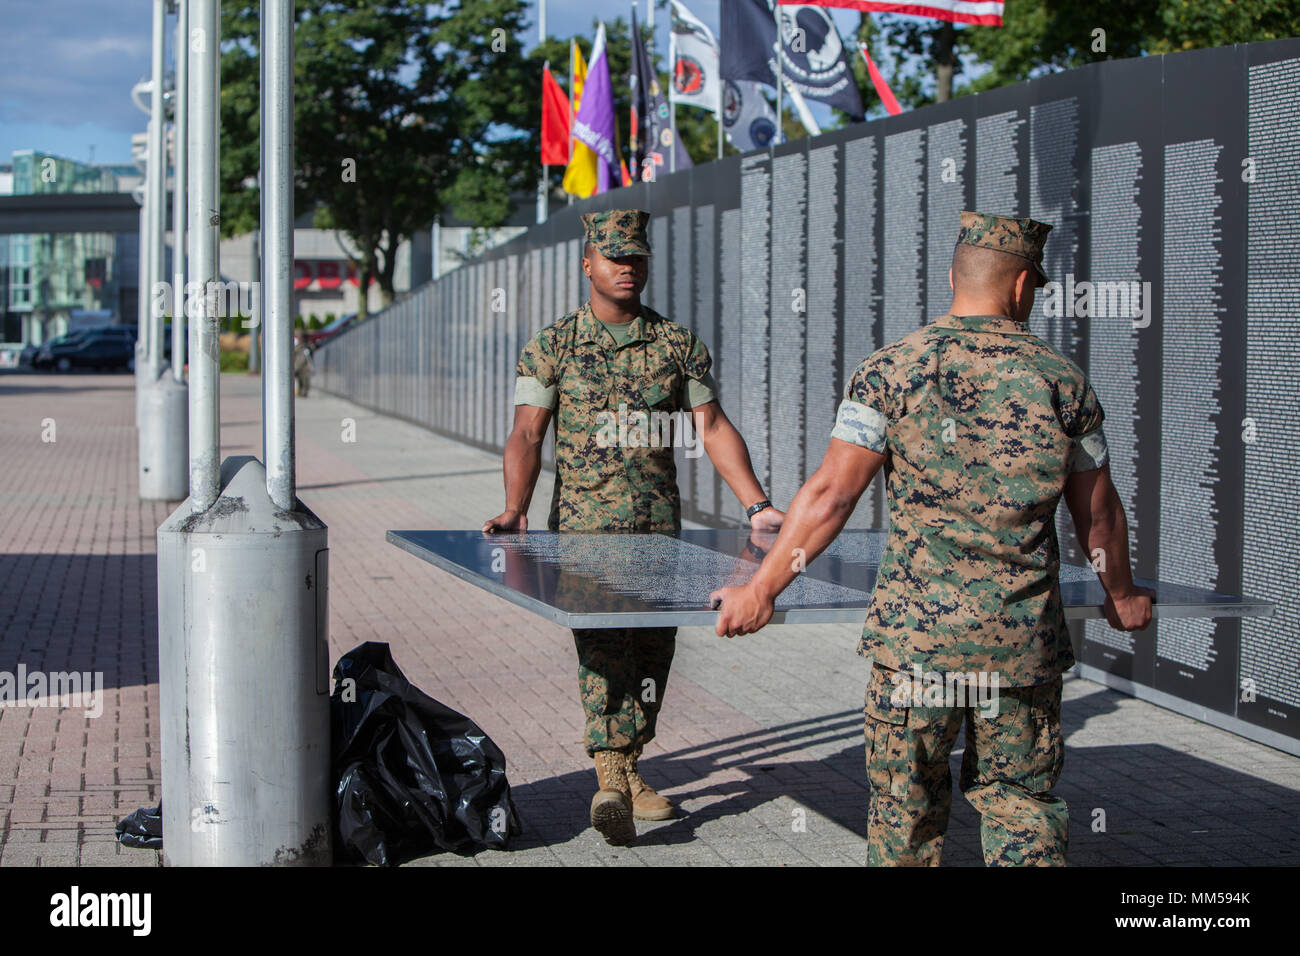 U.S. Marines with Special Purpose Marine Air Ground Task Force Detroit assist in setting up the Traveling Vietnam Memorial Wall as part of Marine Week Detroit, Sept. 8, 2017. Marine Week Detroit is an opportunity to commemorate the unwavering support of the American people, and show the Marine Corps’ continued dedication to protecting the citizens of this country. Stock Photo